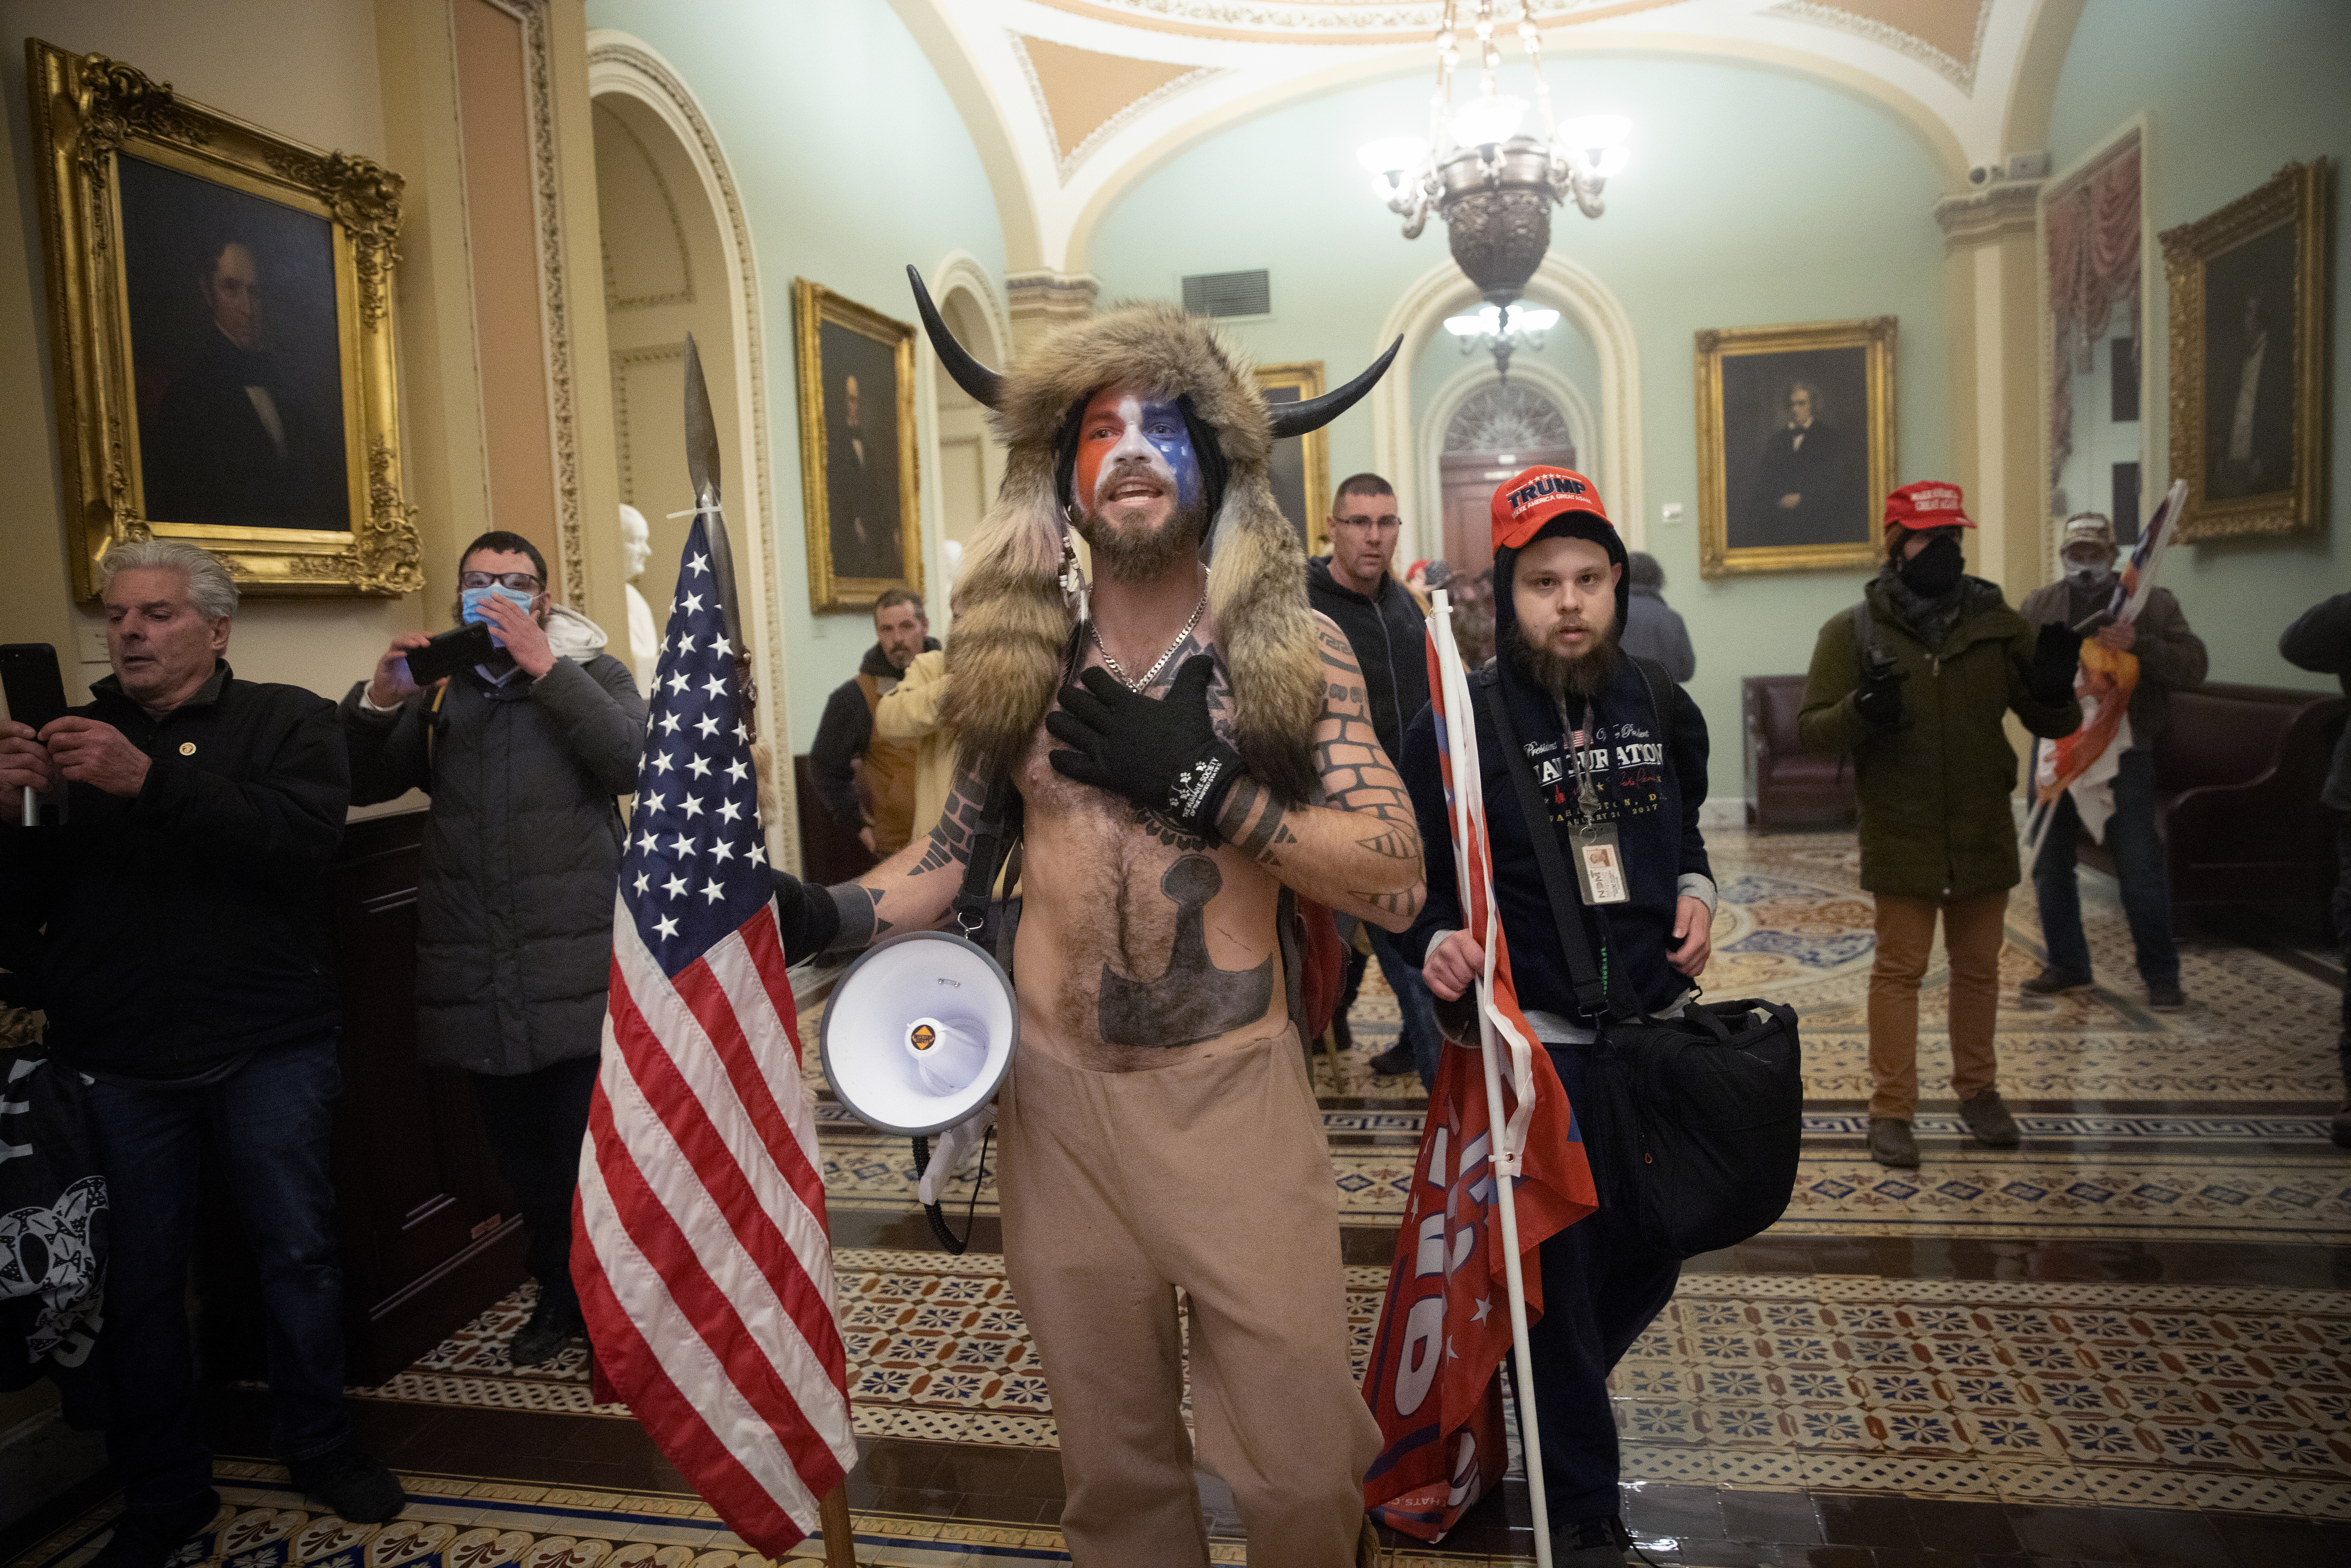  A pro-Trump mob confronts U.S. Capitol police outside the Senate chamber of the U.S. Capitol Building on January 06, 2021